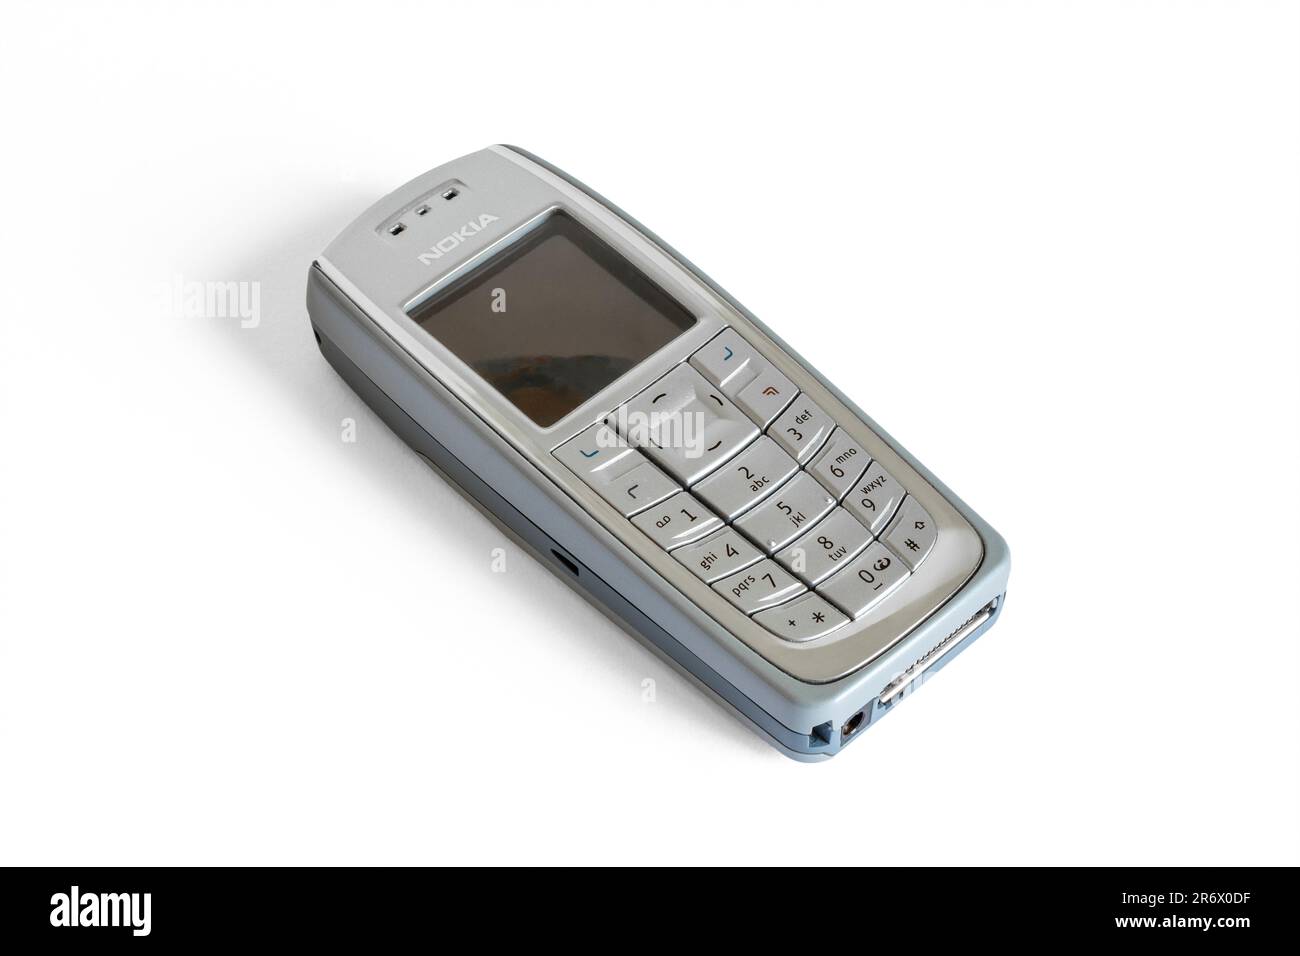 Nokia 3120 RH-19 mobile phone from 2004, isolated on a white background, UK Stock Photo